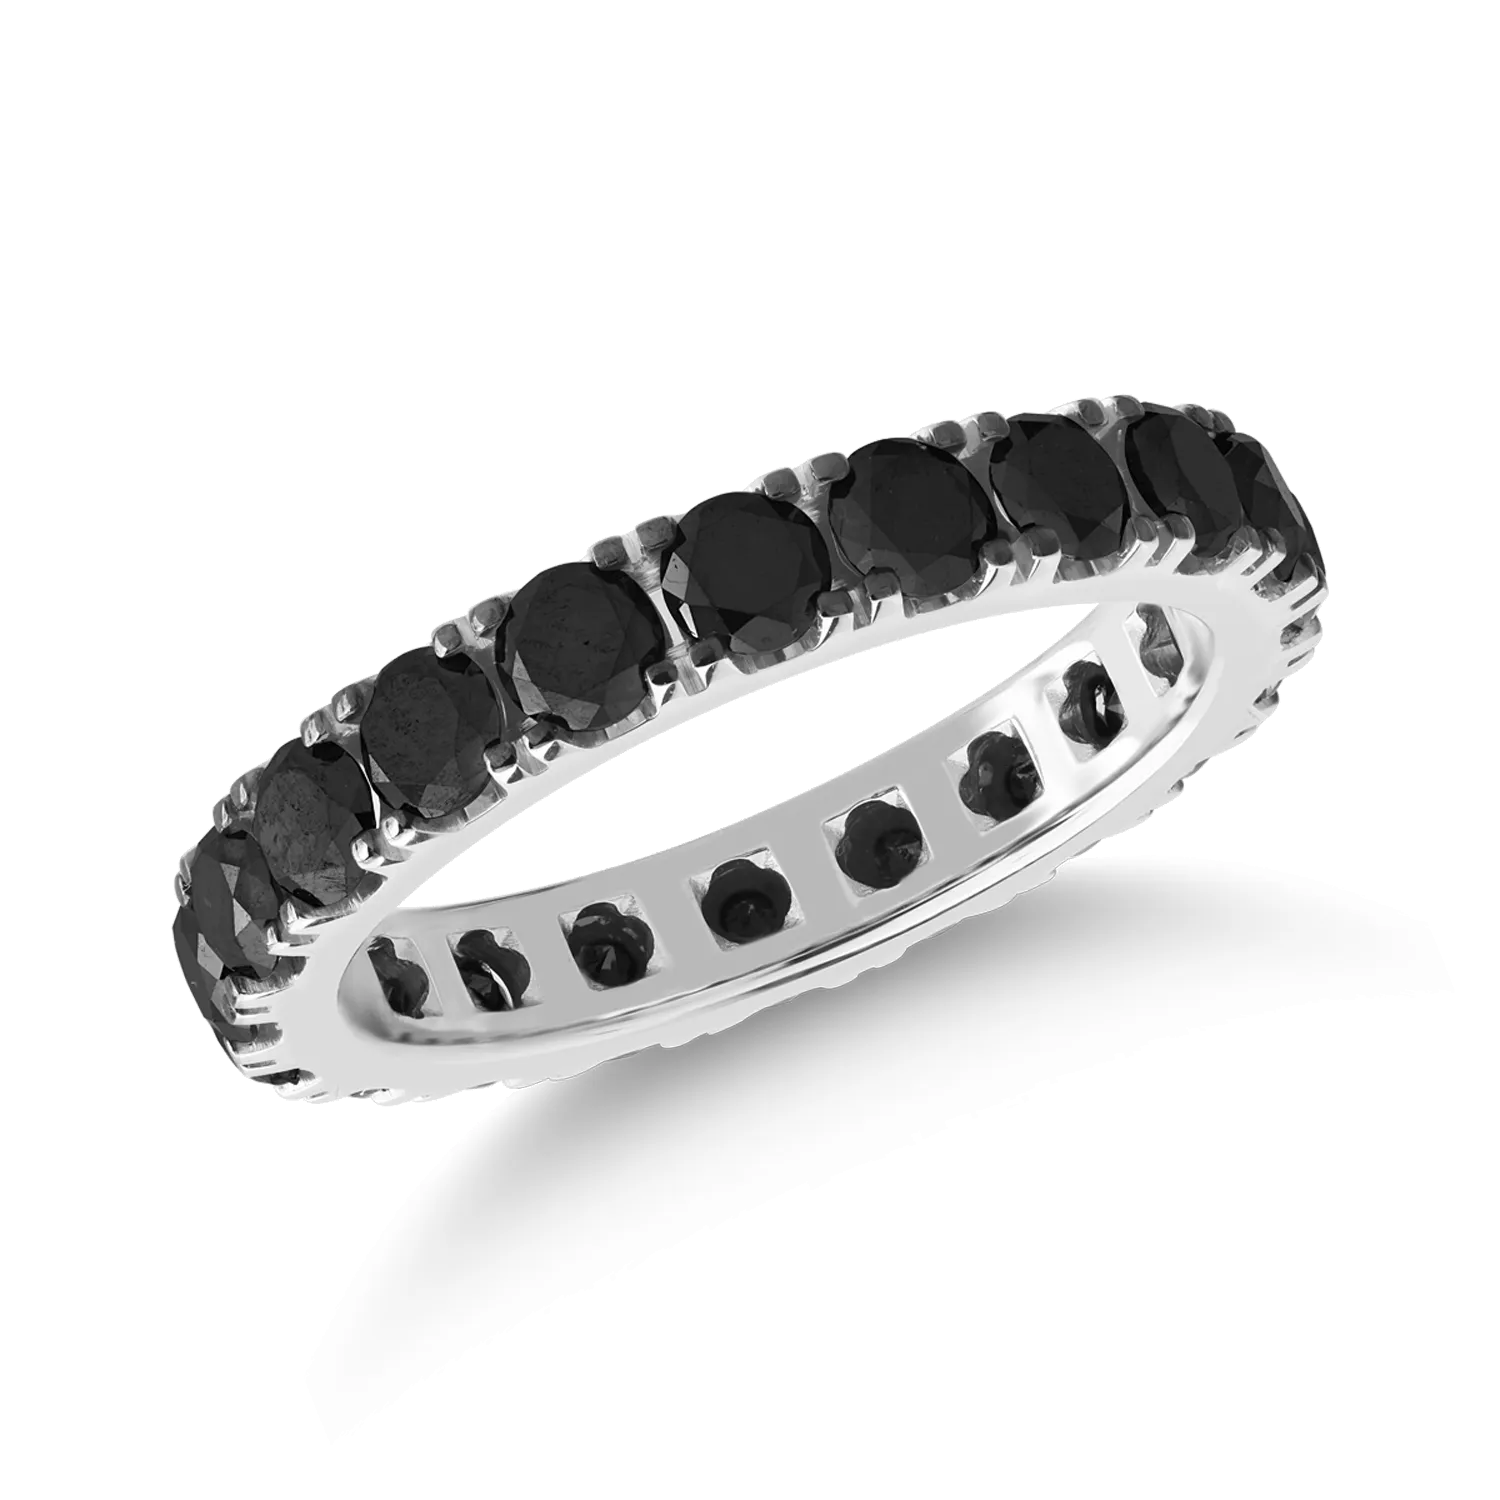 White gold eternity ring with 2.46ct black diamonds